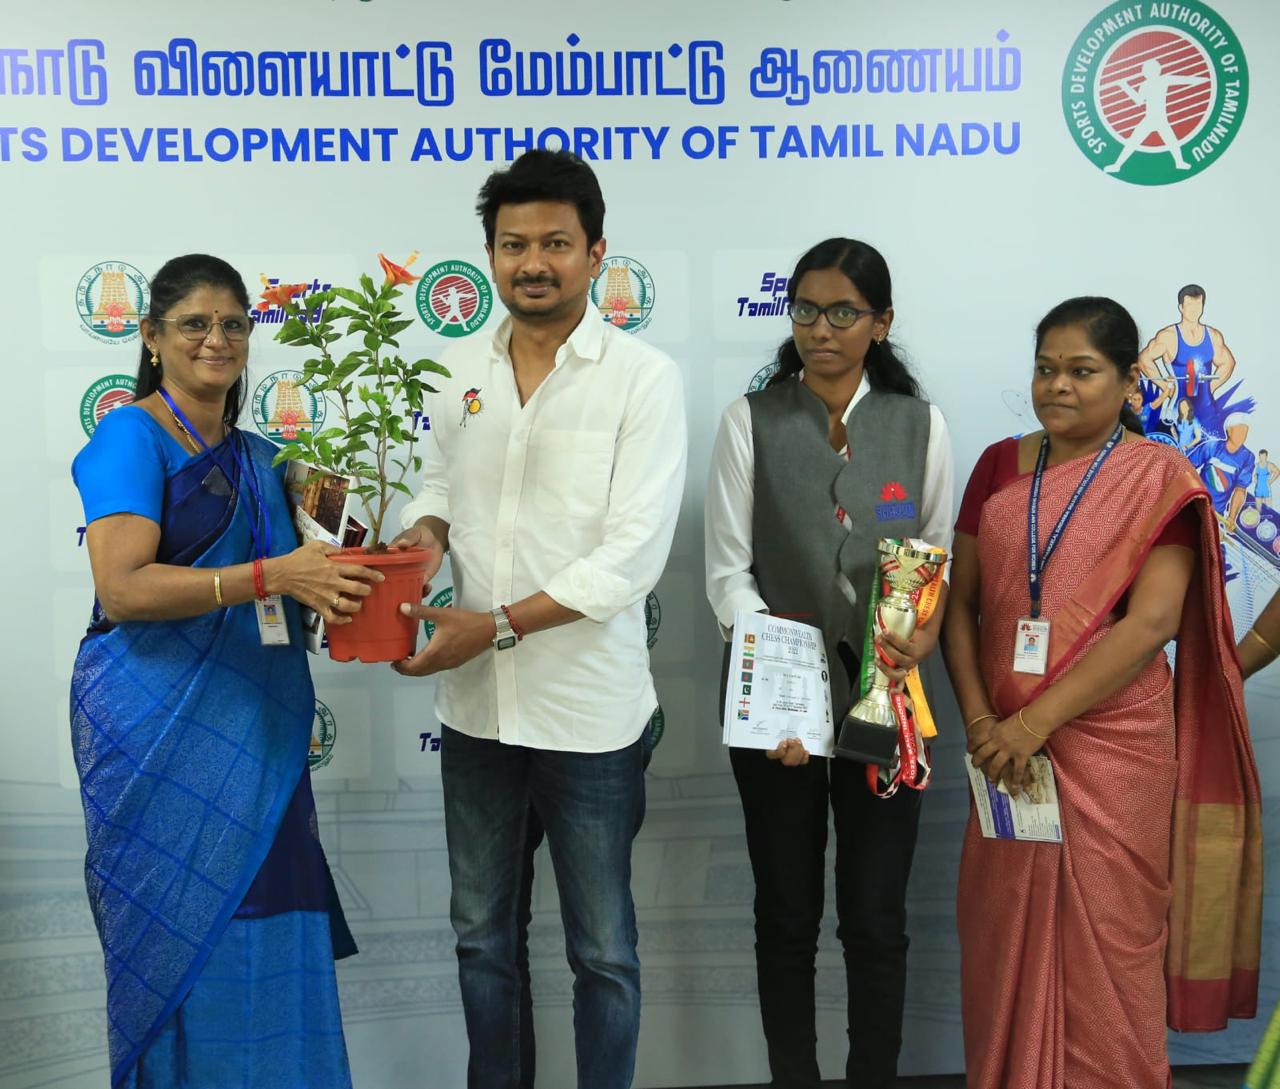 The Minister for Youth Welfare and Sports Development Udhayanidhi Stalin met and felicitated Ms. Rindhiya V